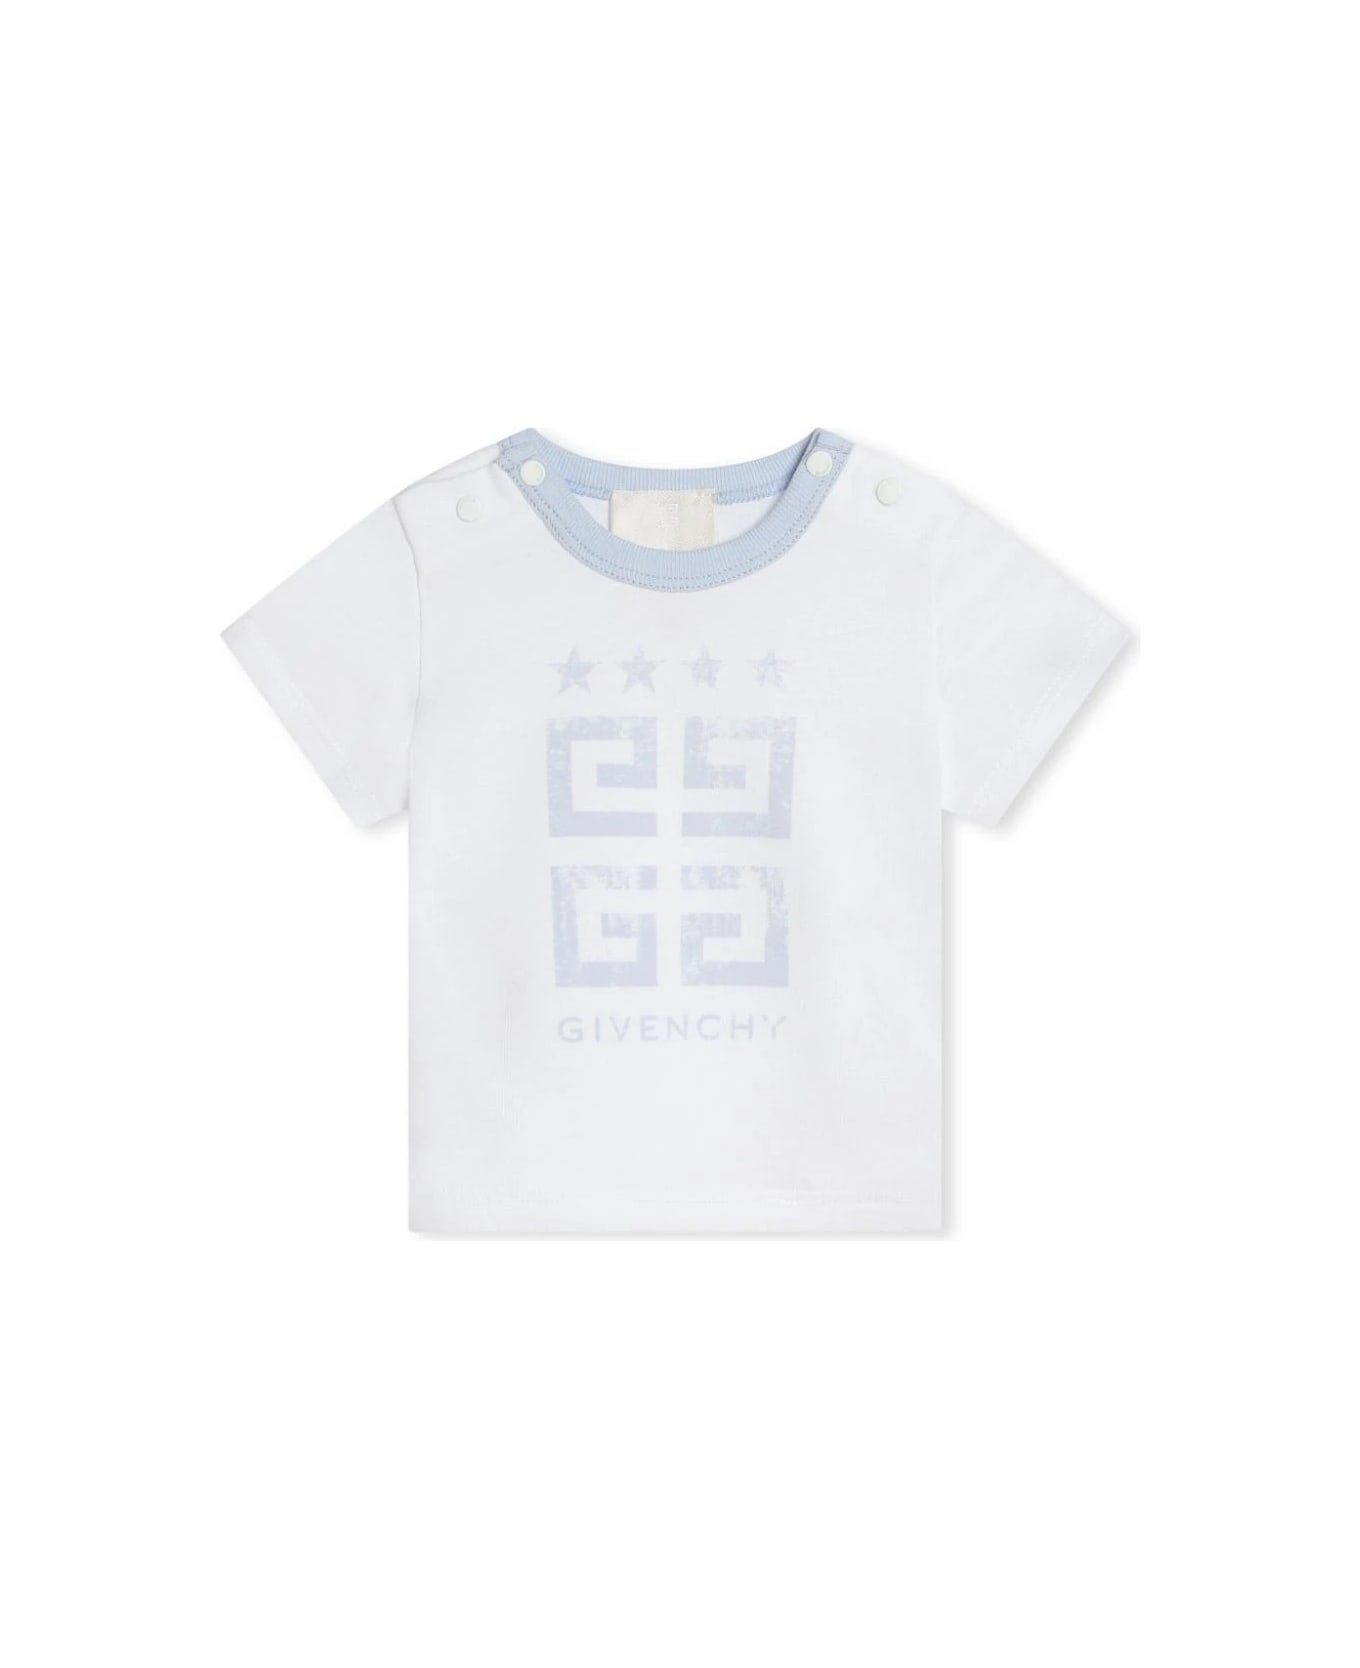 Givenchy White And Light Blue Set With T-shirt, Shorts And Bandana - Blue ボディスーツ＆セットアップ